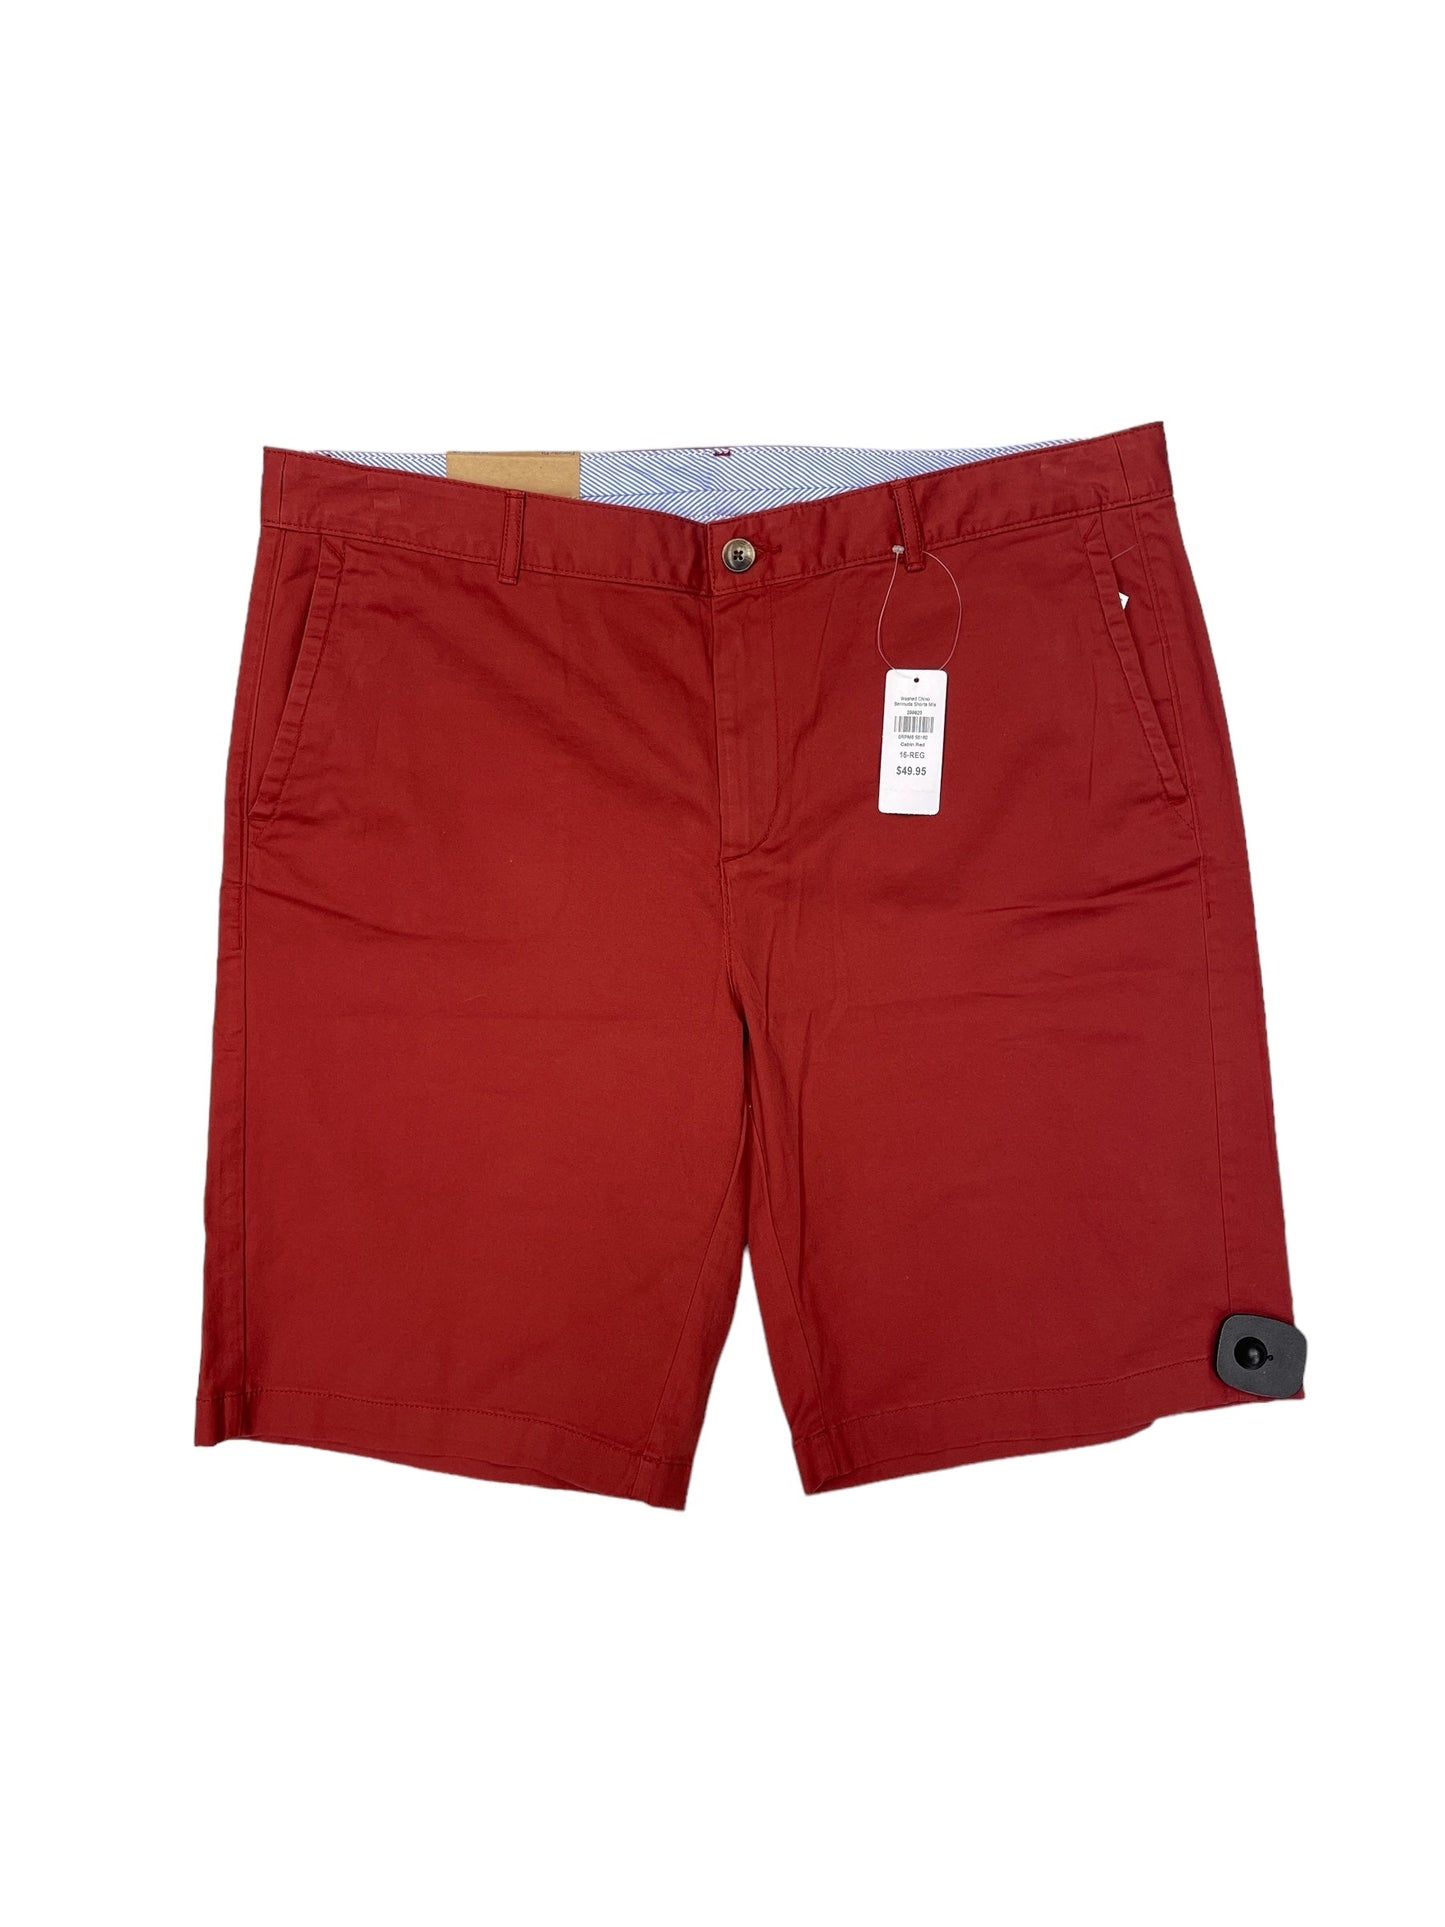 Red Shorts L.l. Bean, Size 16